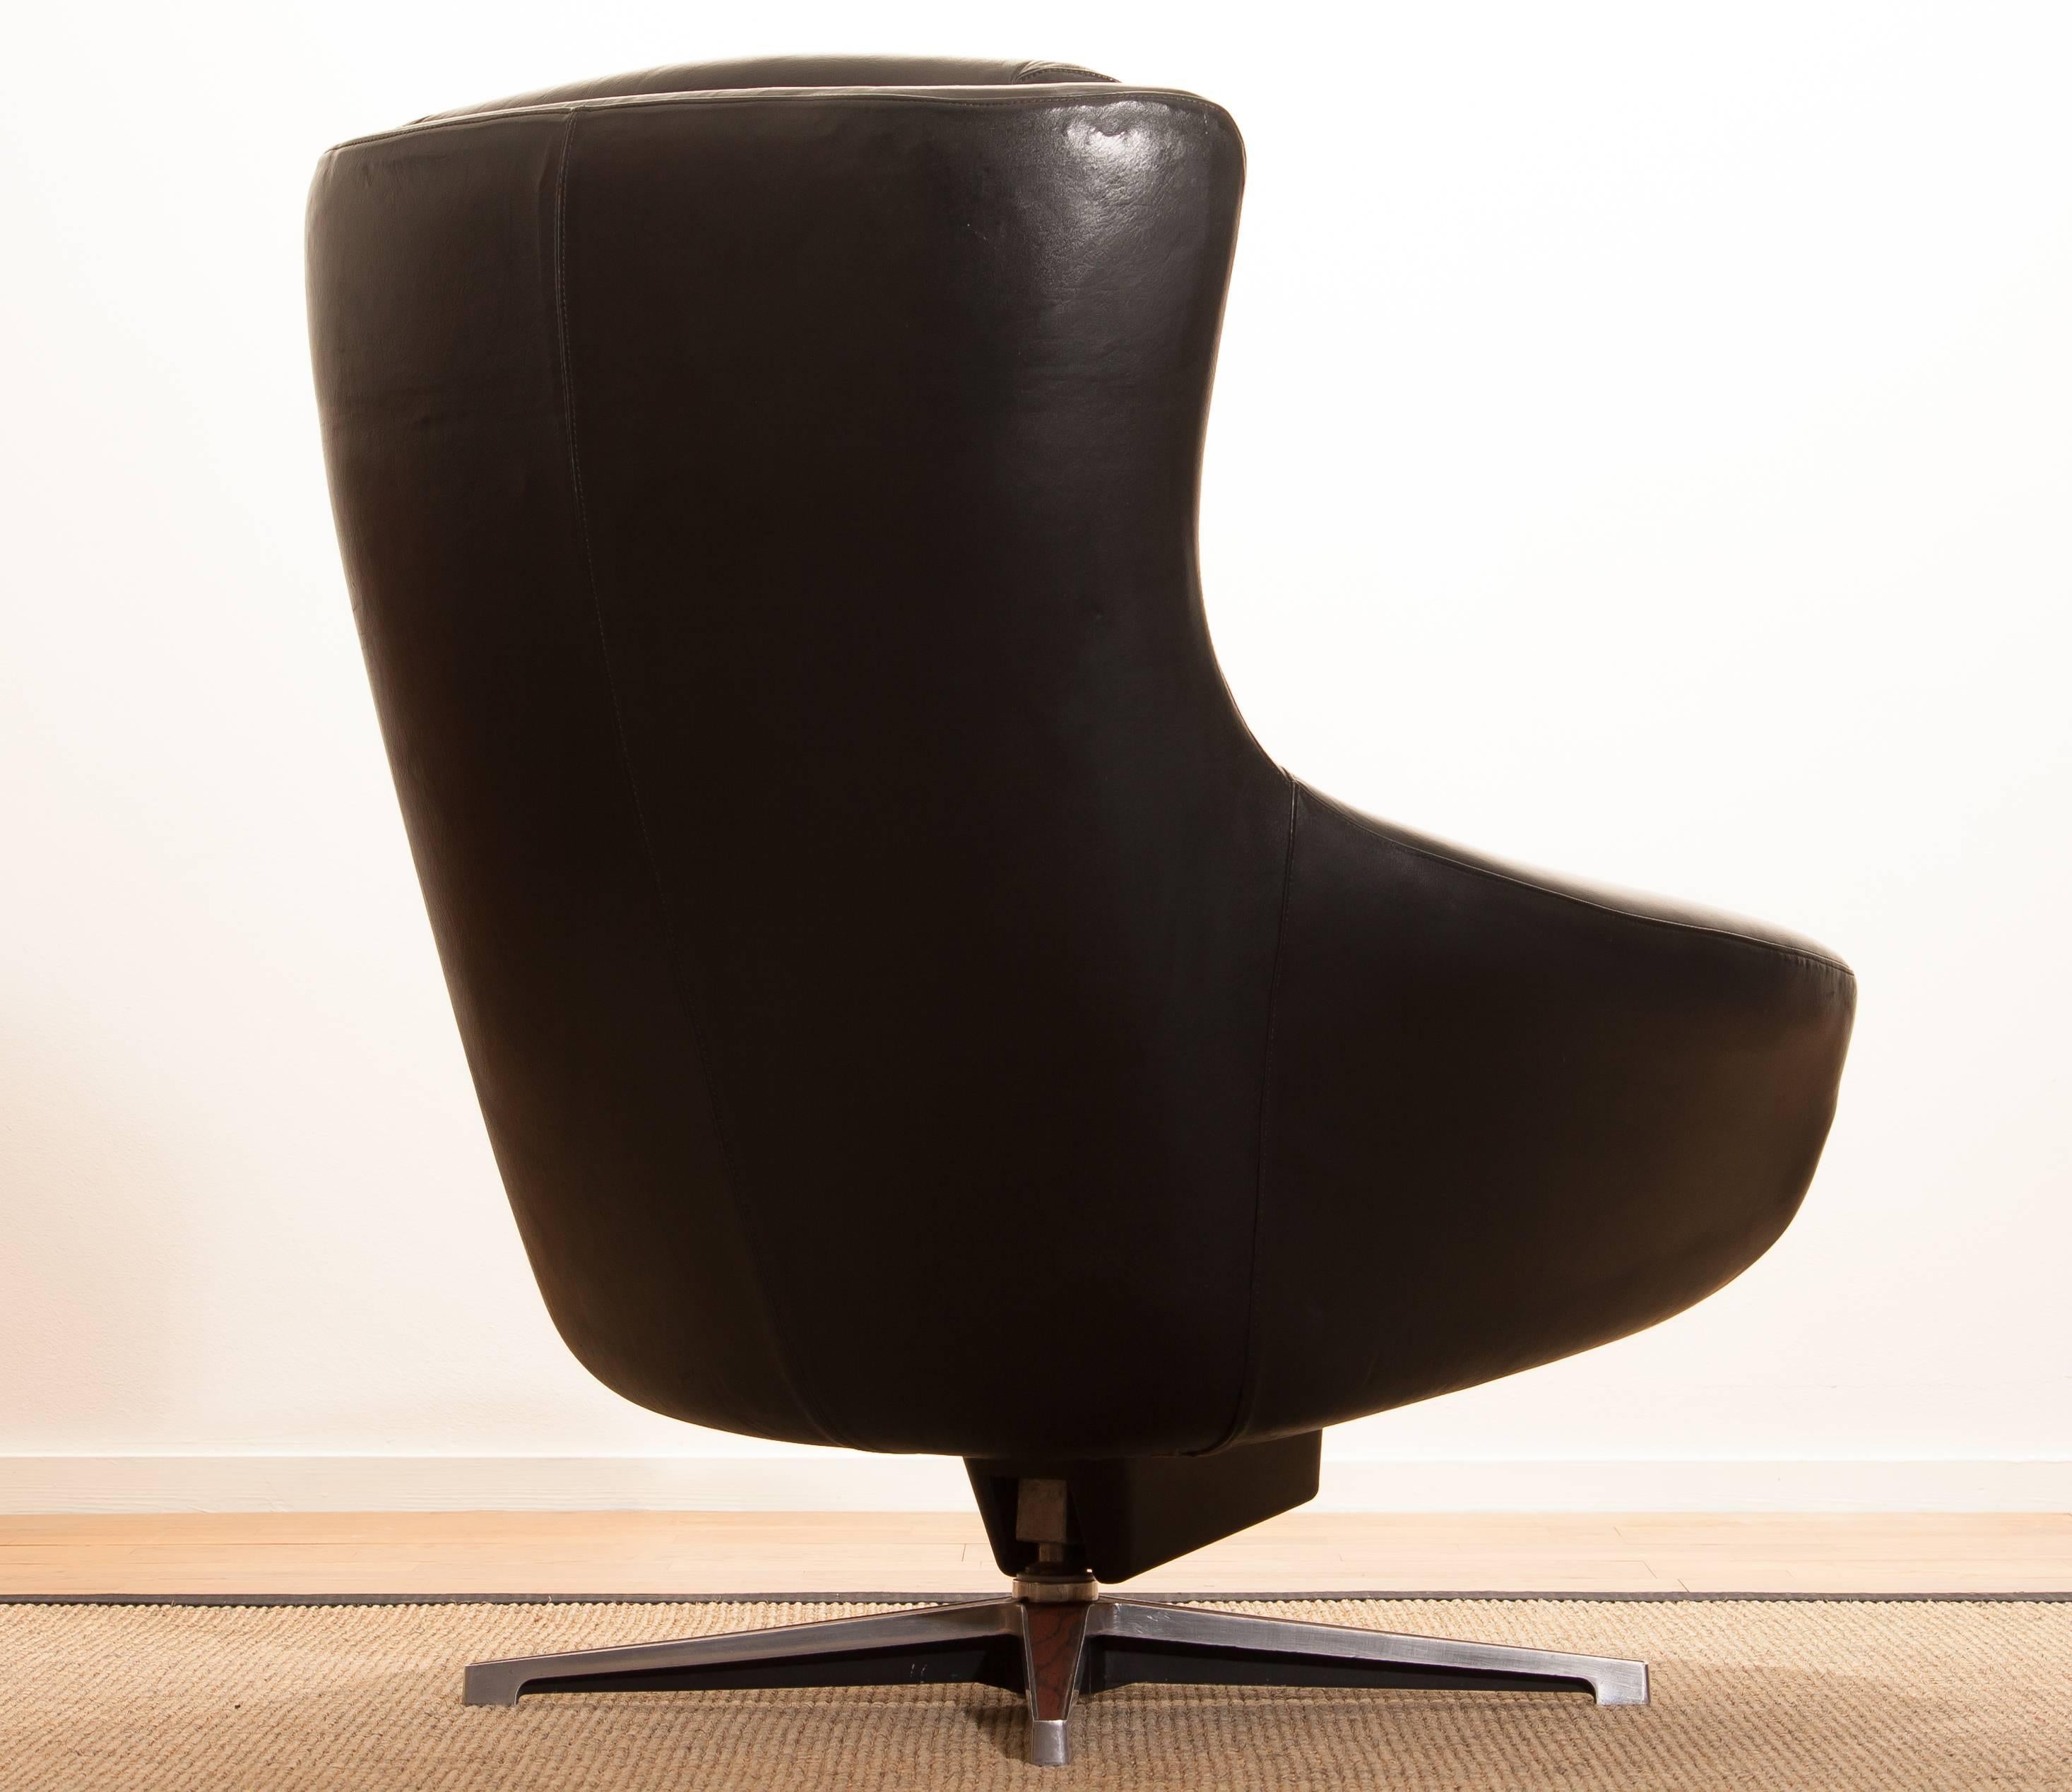 Beautiful swivel lounge chair by Lennart Bender.
This chair is made of a black leather seating on a chromed swivel rocking frame.
It is in a very nice condition.
Period 1960s
Dimensions H 91 cm, W 74 cm, D 70 cm, SH 40 cm.